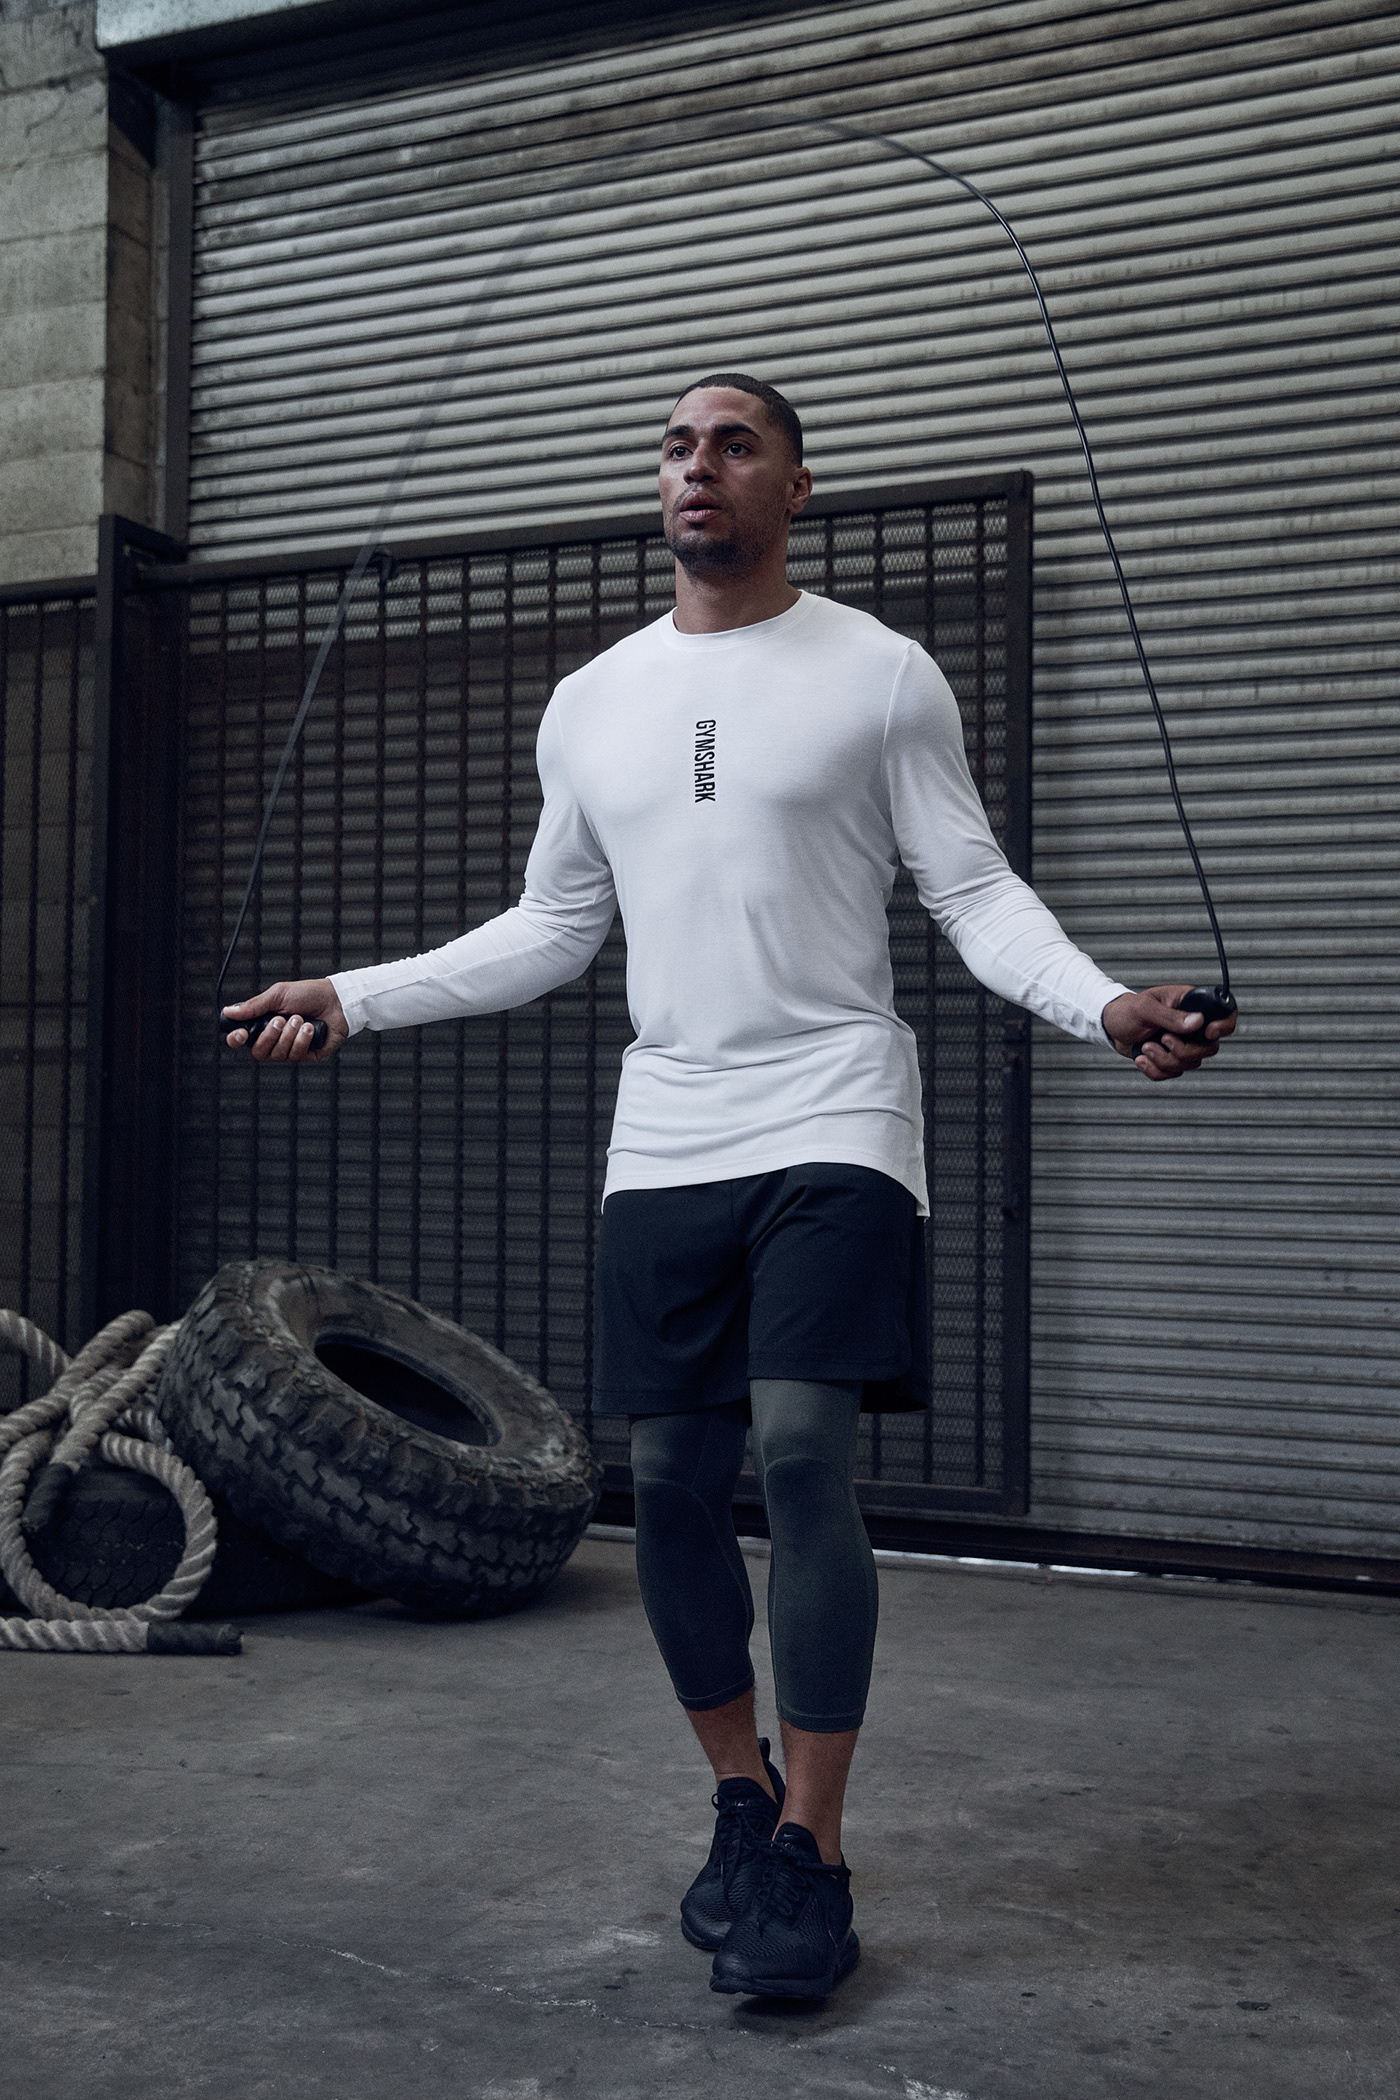 gymshark workout sweat Boxing gym fitness shadow athlete Crossfit Fashion 